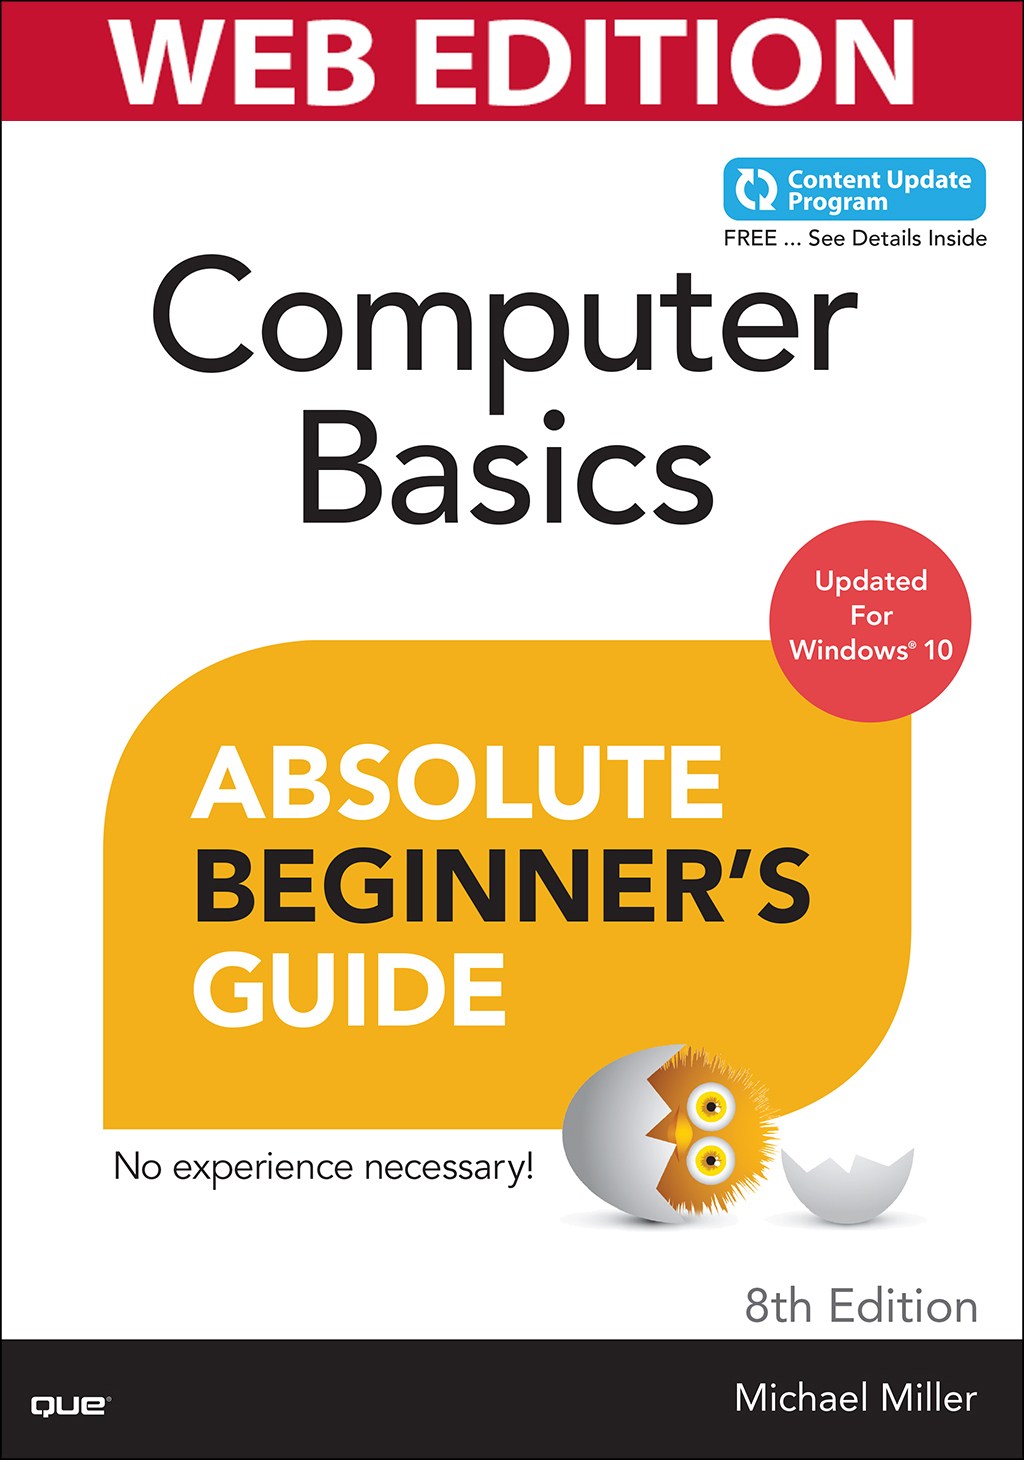 Computer Basics Absolute Beginner's Guide, Windows 10 Edition (Web Edition with Content Update Program)